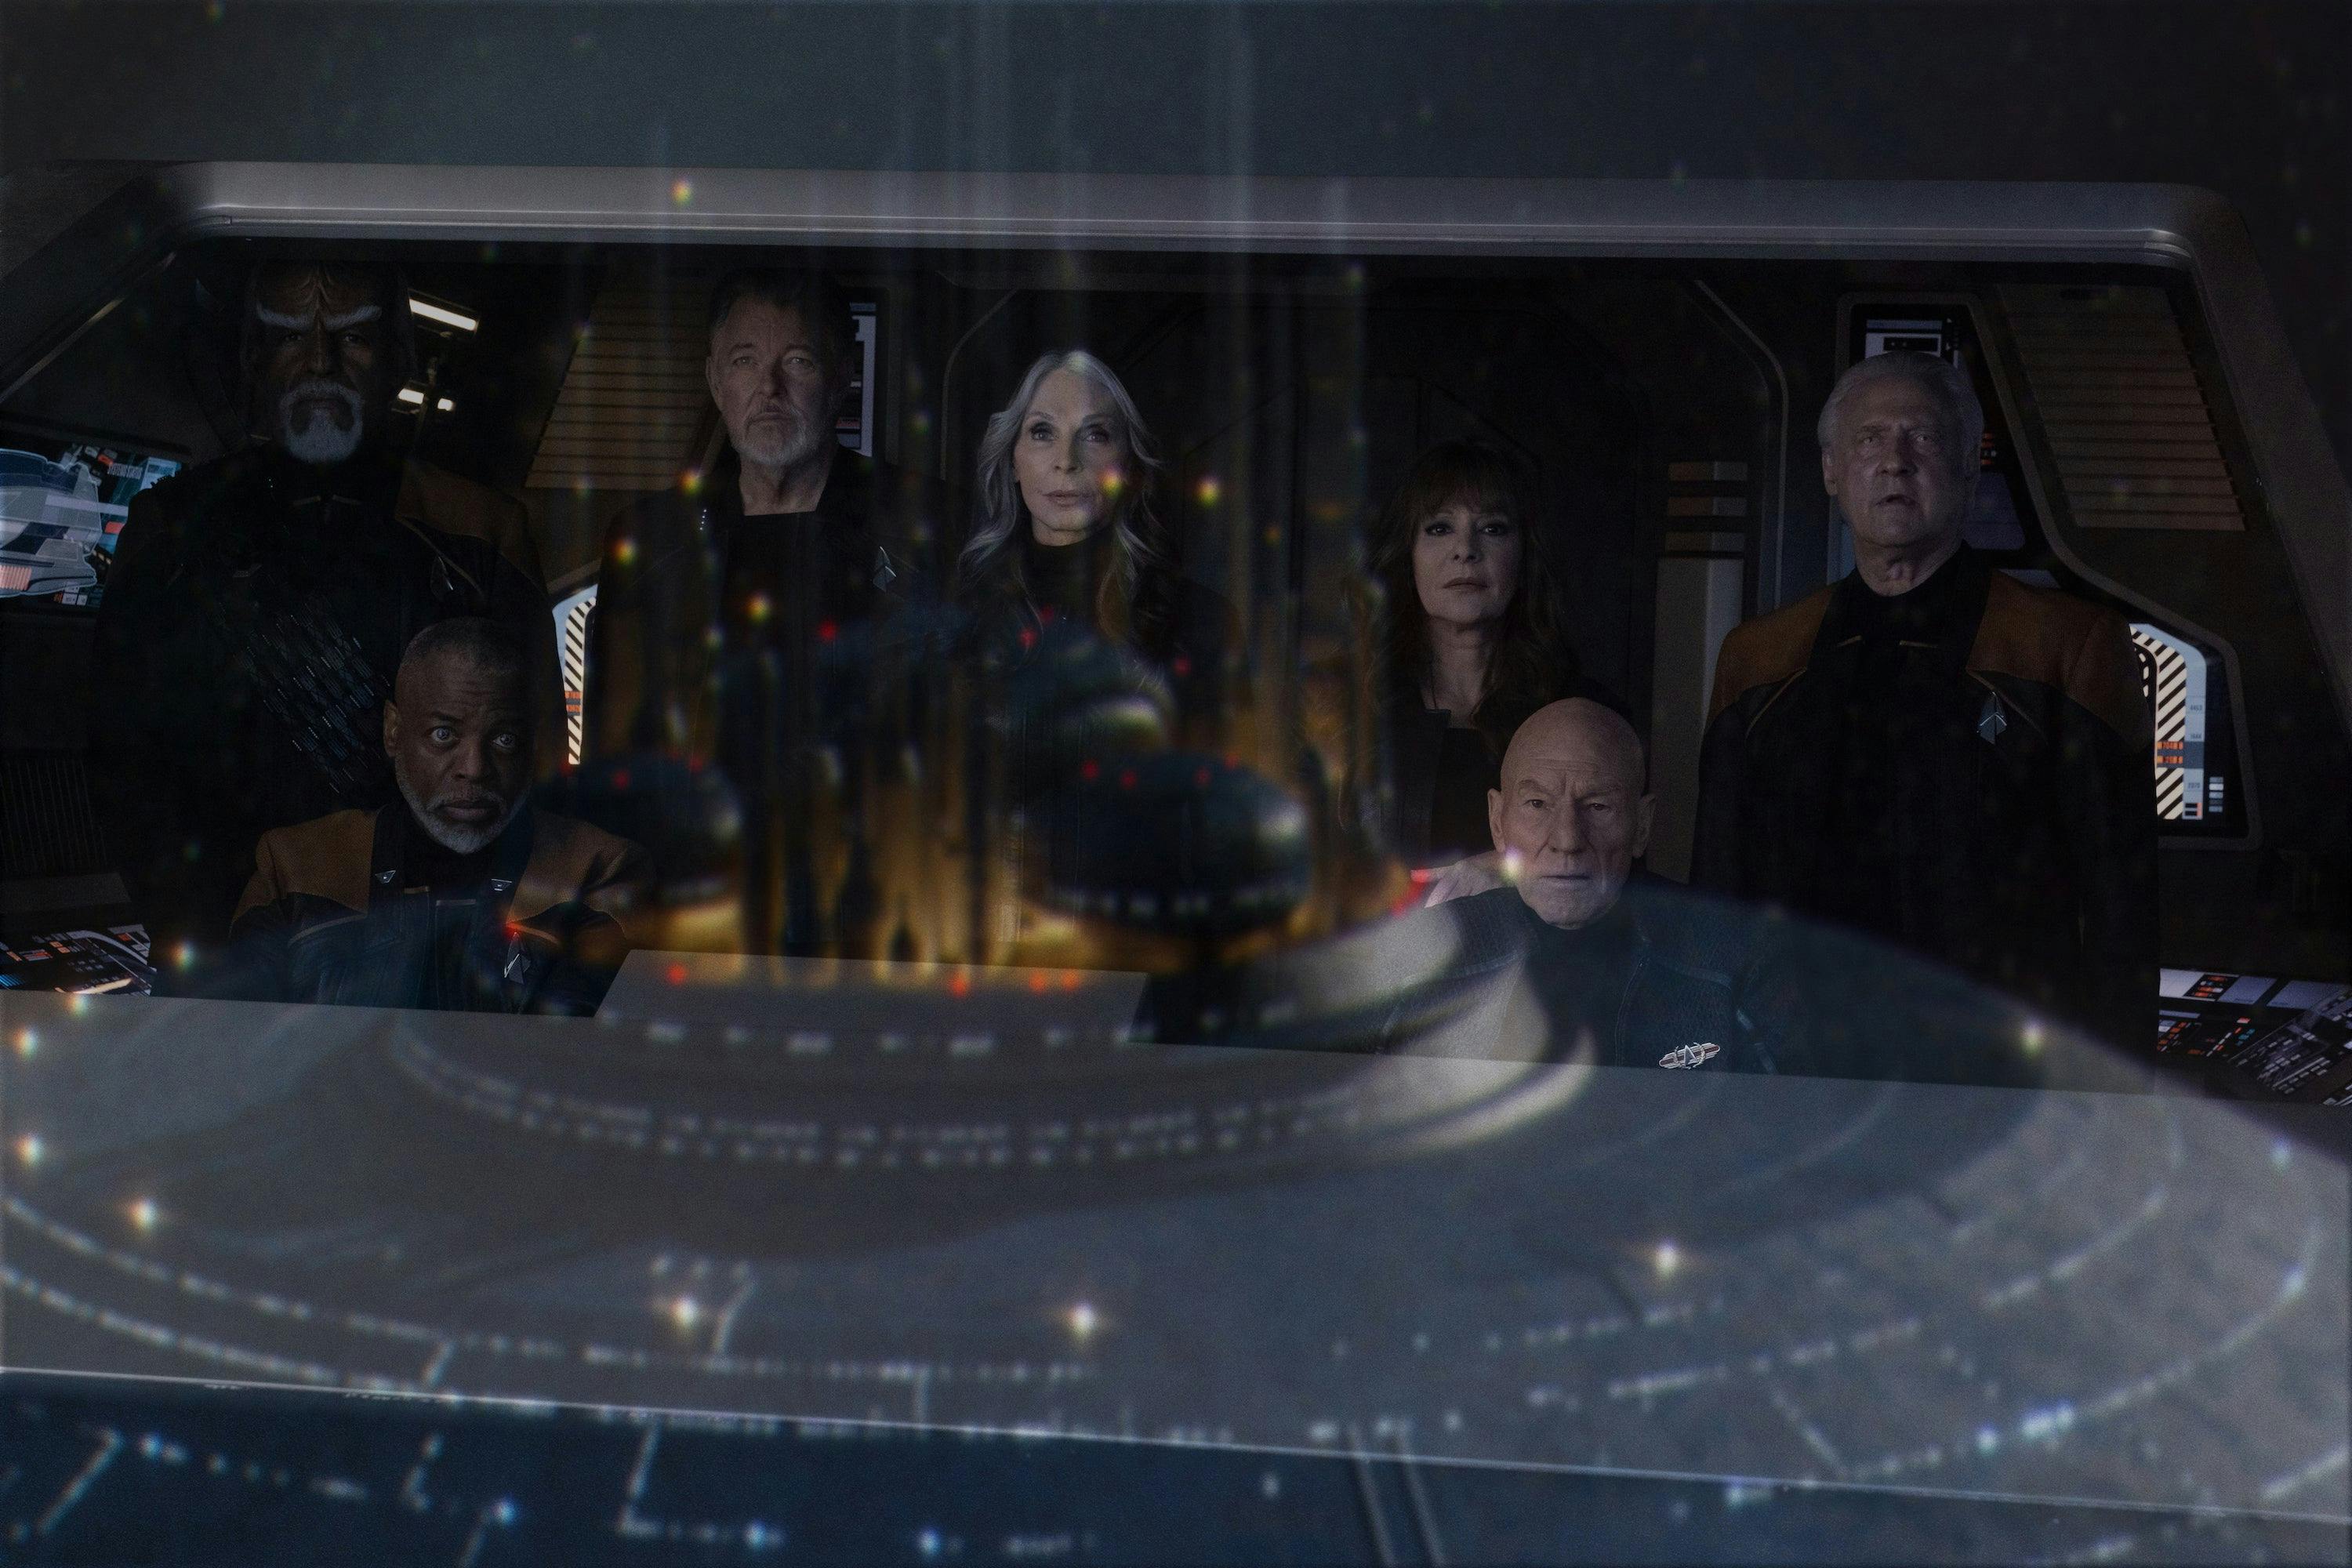 Aboard the shuttle, the old crew (Geordi, Riker, Beverly, Deanna, Picard, Data, and Worf admire the reconstructed Enterprise-D in front of them in 'Vox'